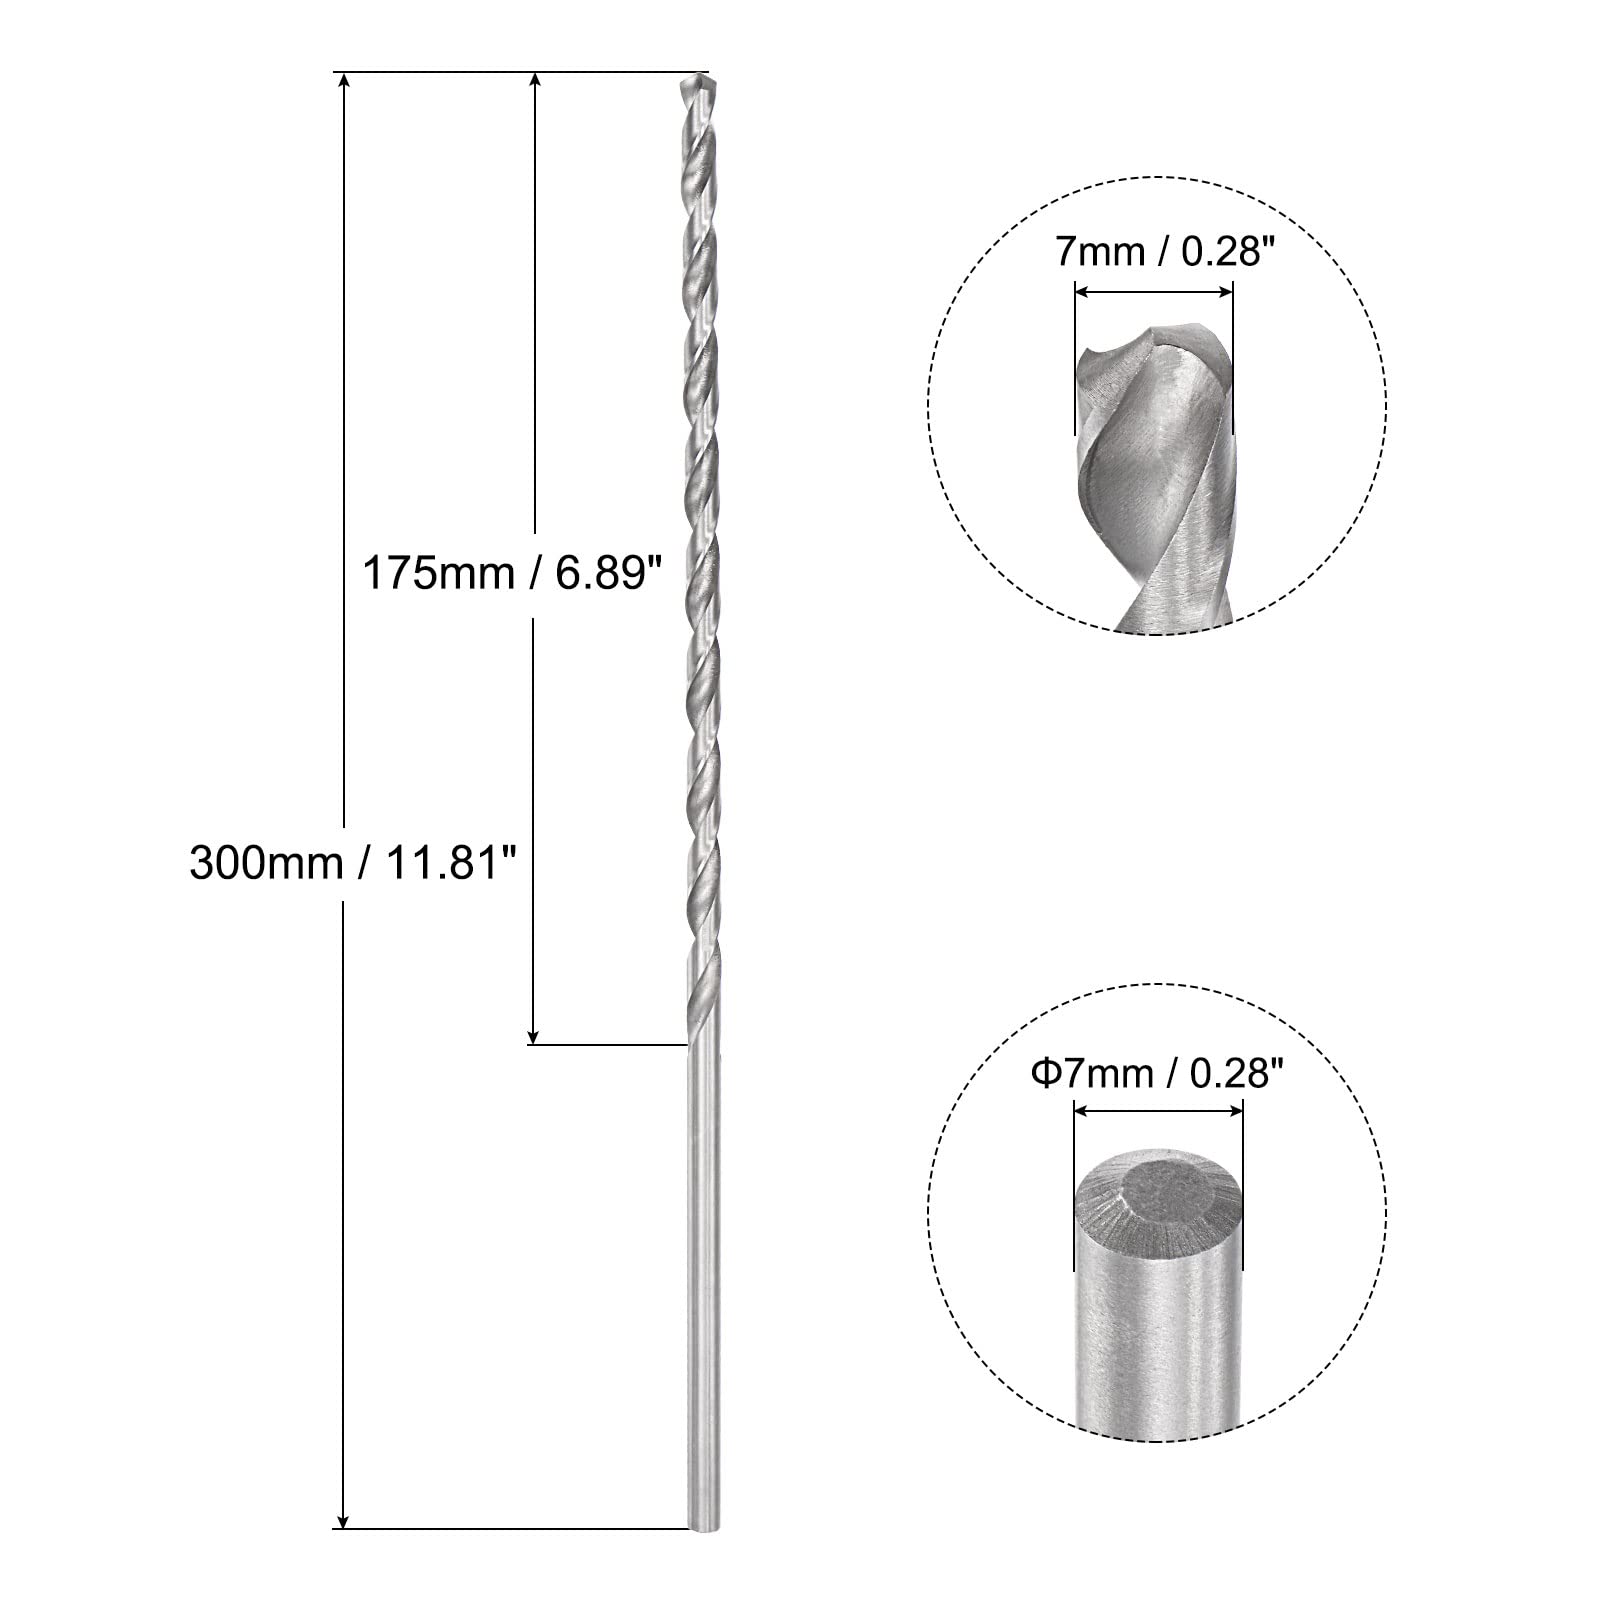 uxcell 7mm Twist Drill Bits, High-Speed Steel Straight Shank Extra Long Drill Bit 300mm Length for Wood Plastic Aluminum